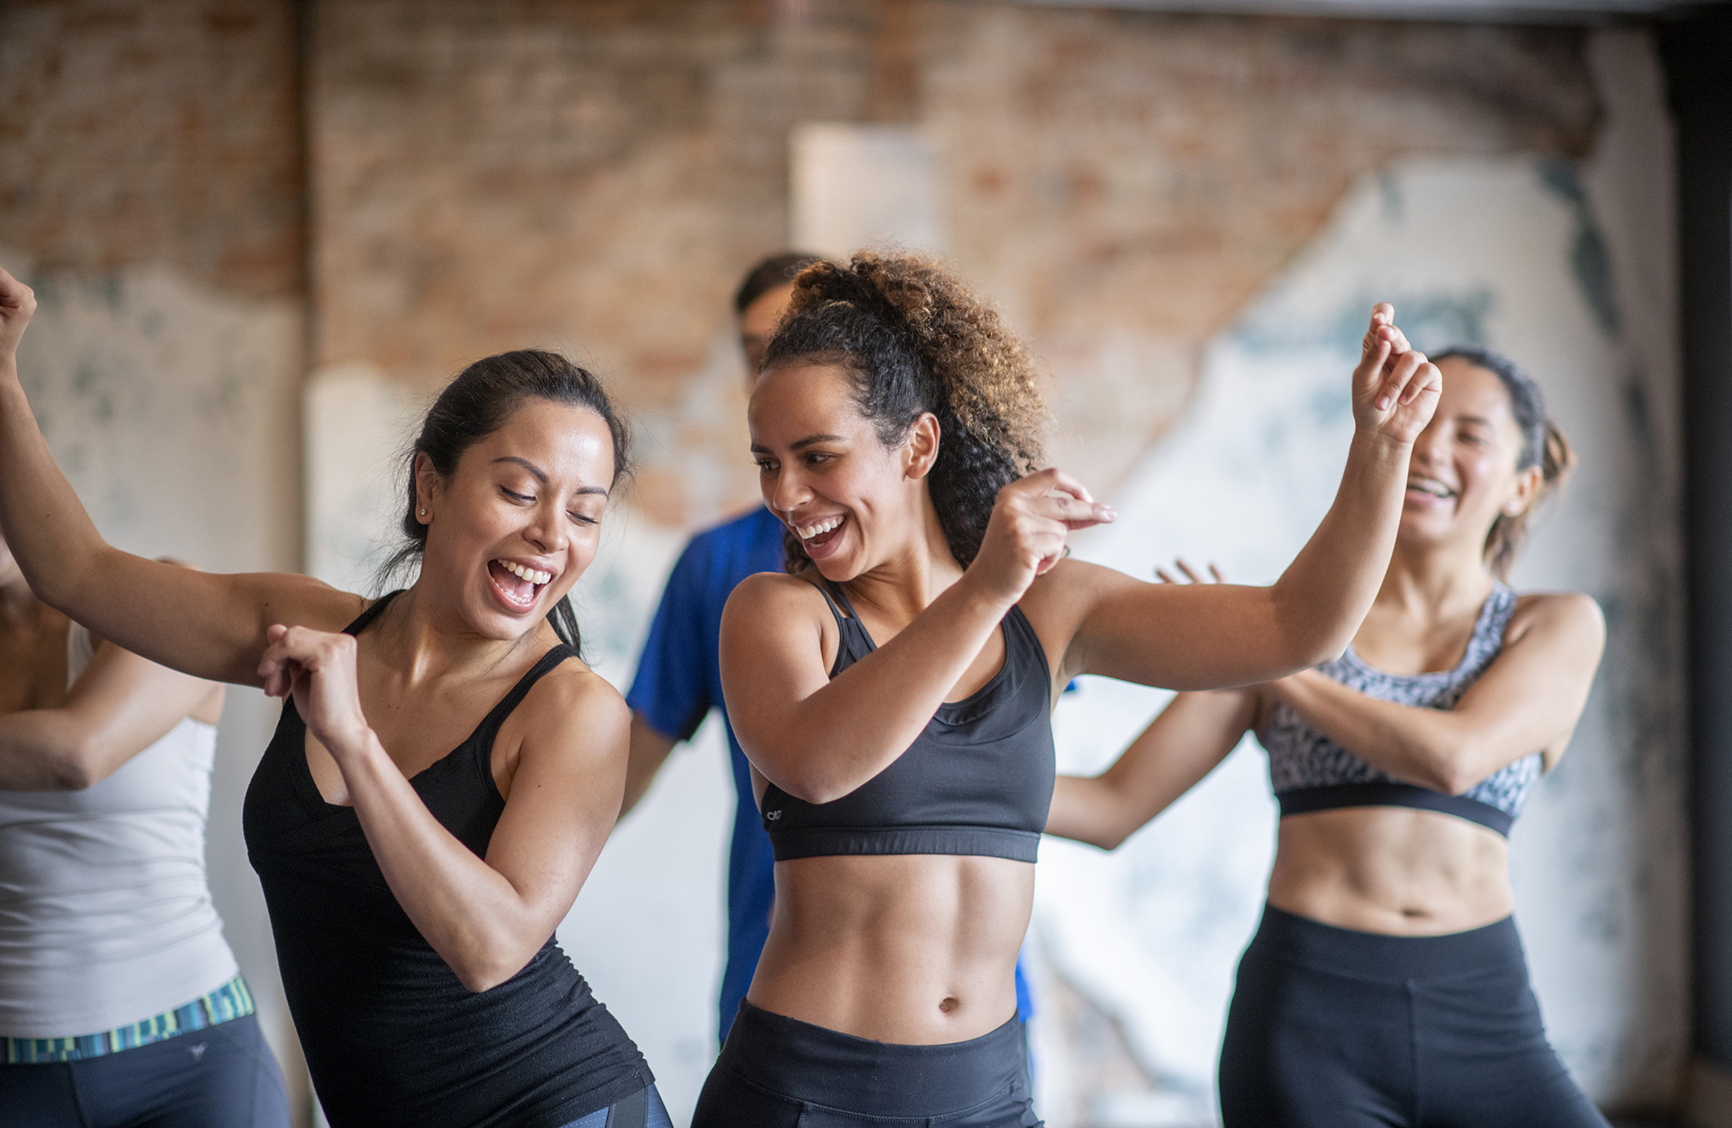 A small group of Hispanic men and women participate in a fitness dance class. They are wearing comfortable athletic wear and have their arms p as they dance and move around the room with joyful expressions. The focus is on two women in front who are bumping hips!